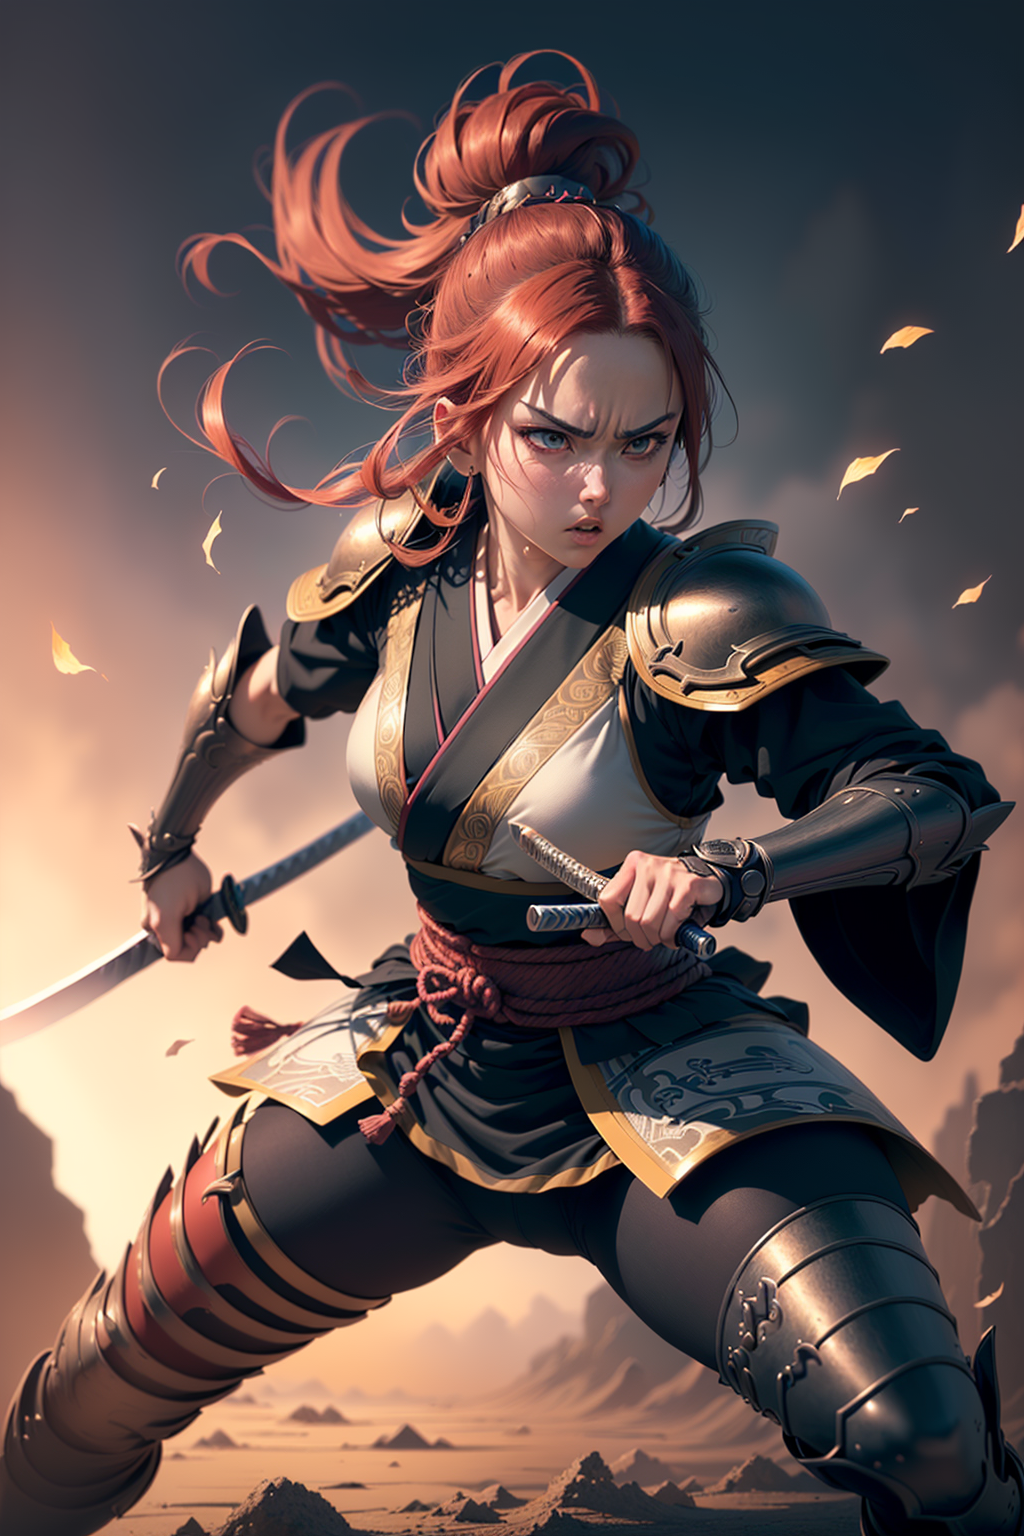 "Warrior Woman with Red Hair and Sword" - Anime-style illustration of a female warrior with a sword, wearing a black and white outfit and a red headband.